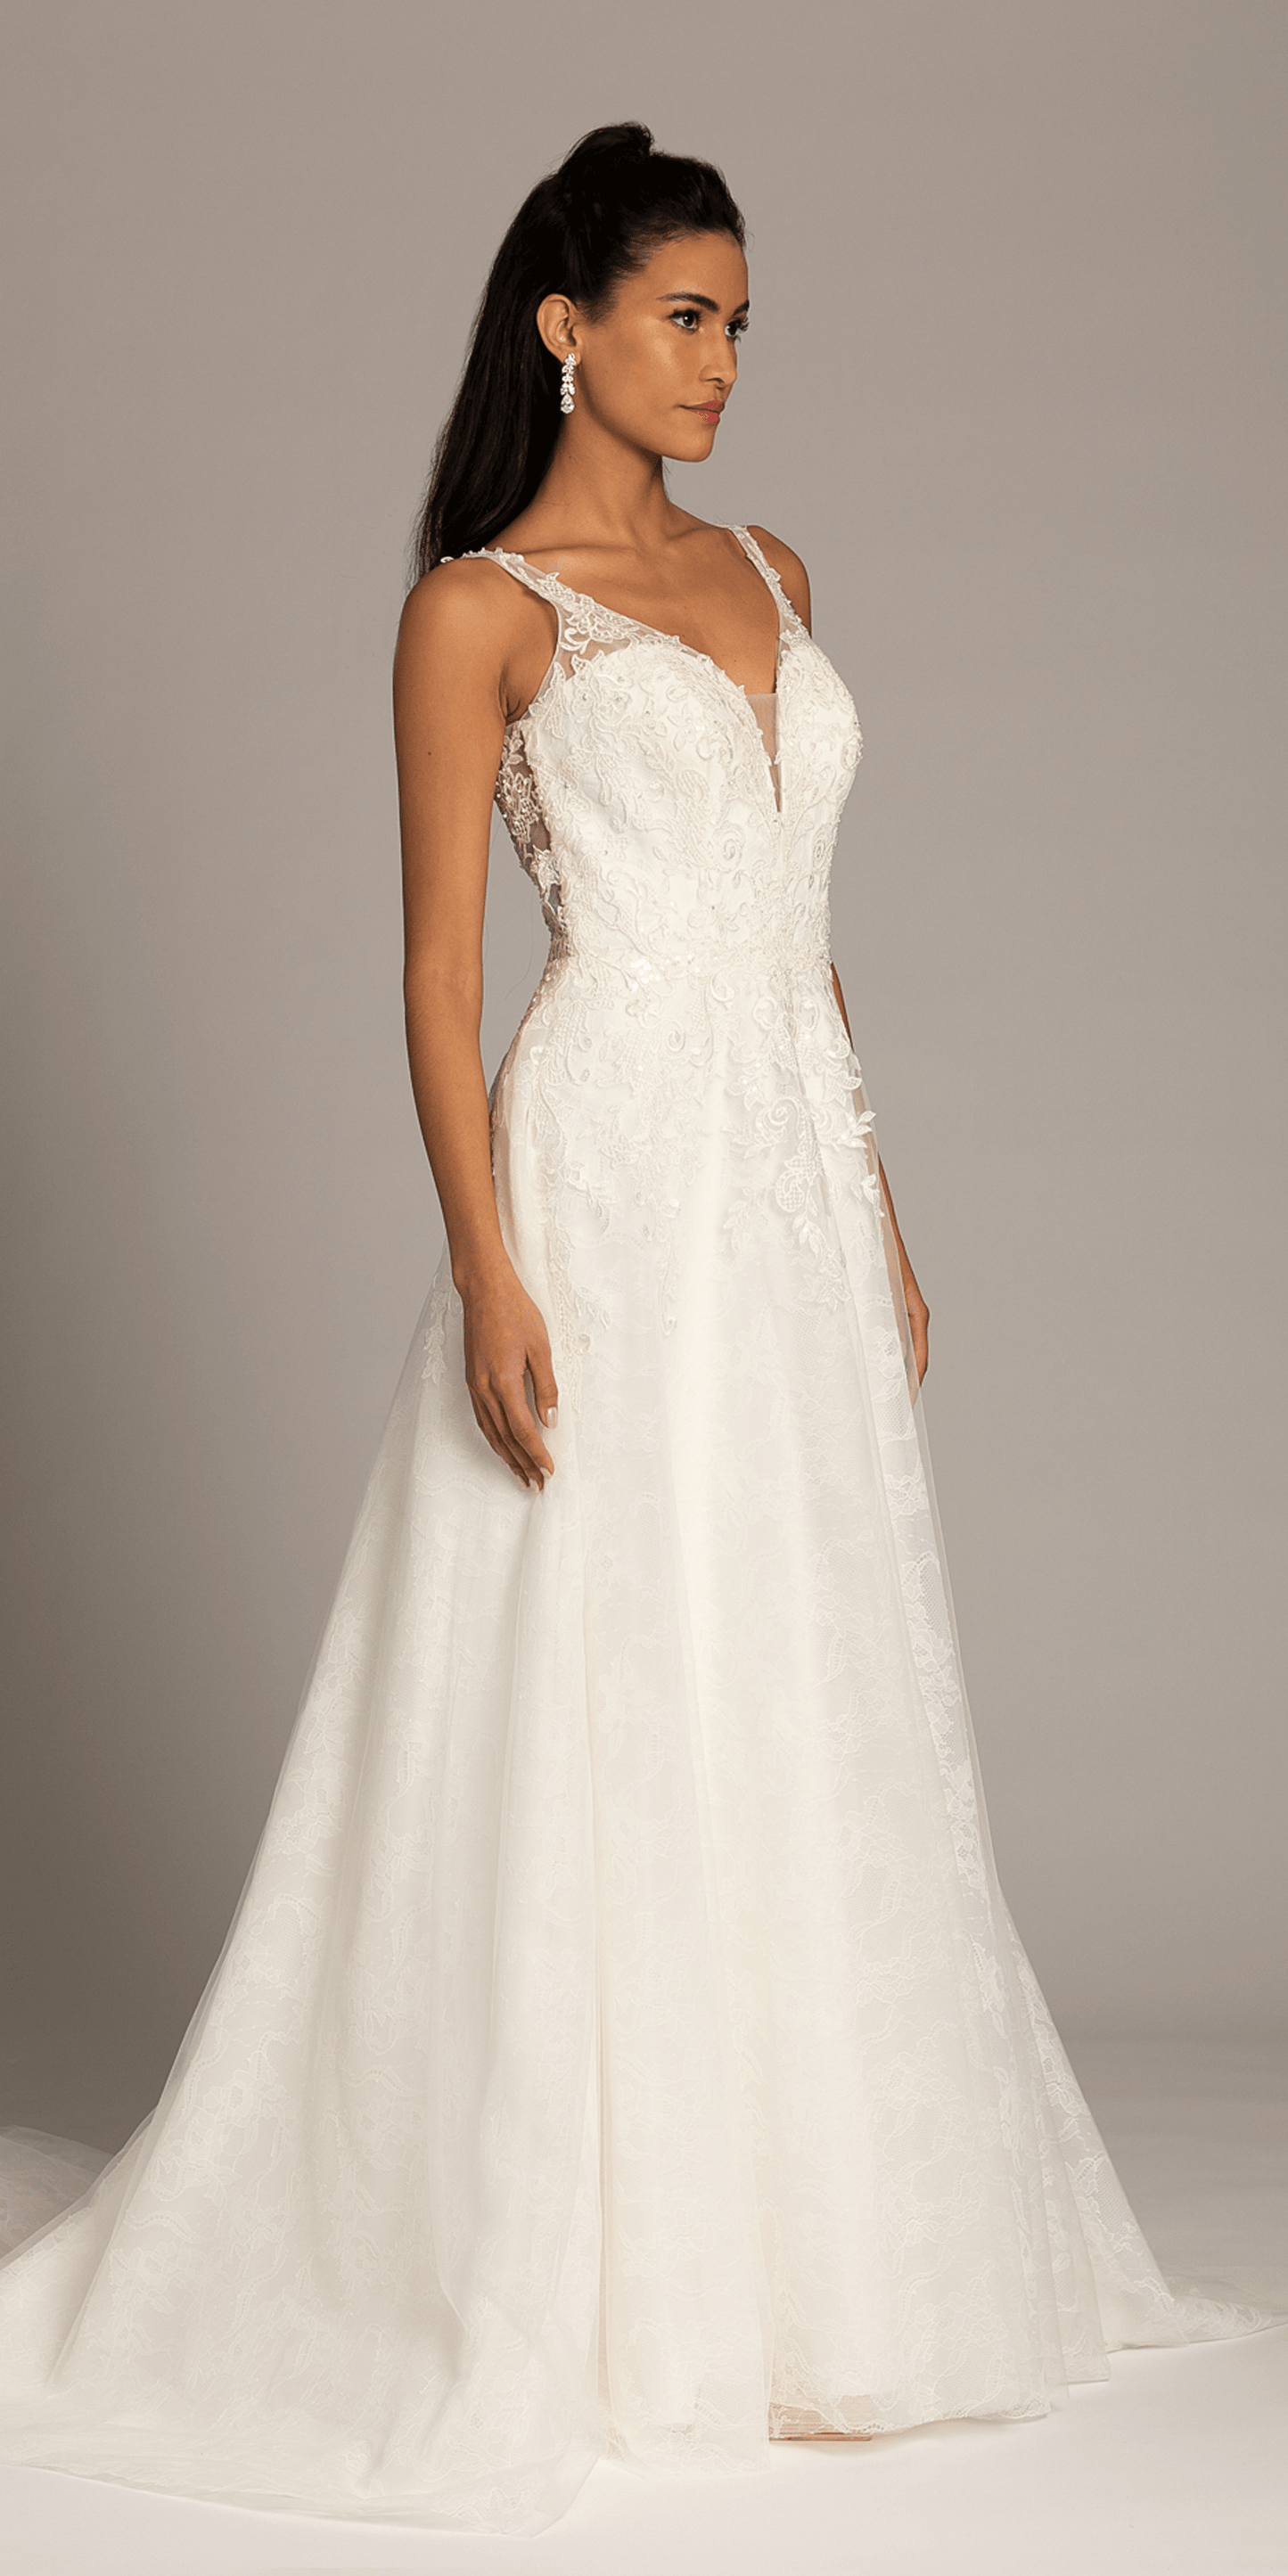 Camille La Vie Plunging Lace Tulle Ballgown Dress with Train missy / 2 / ivory